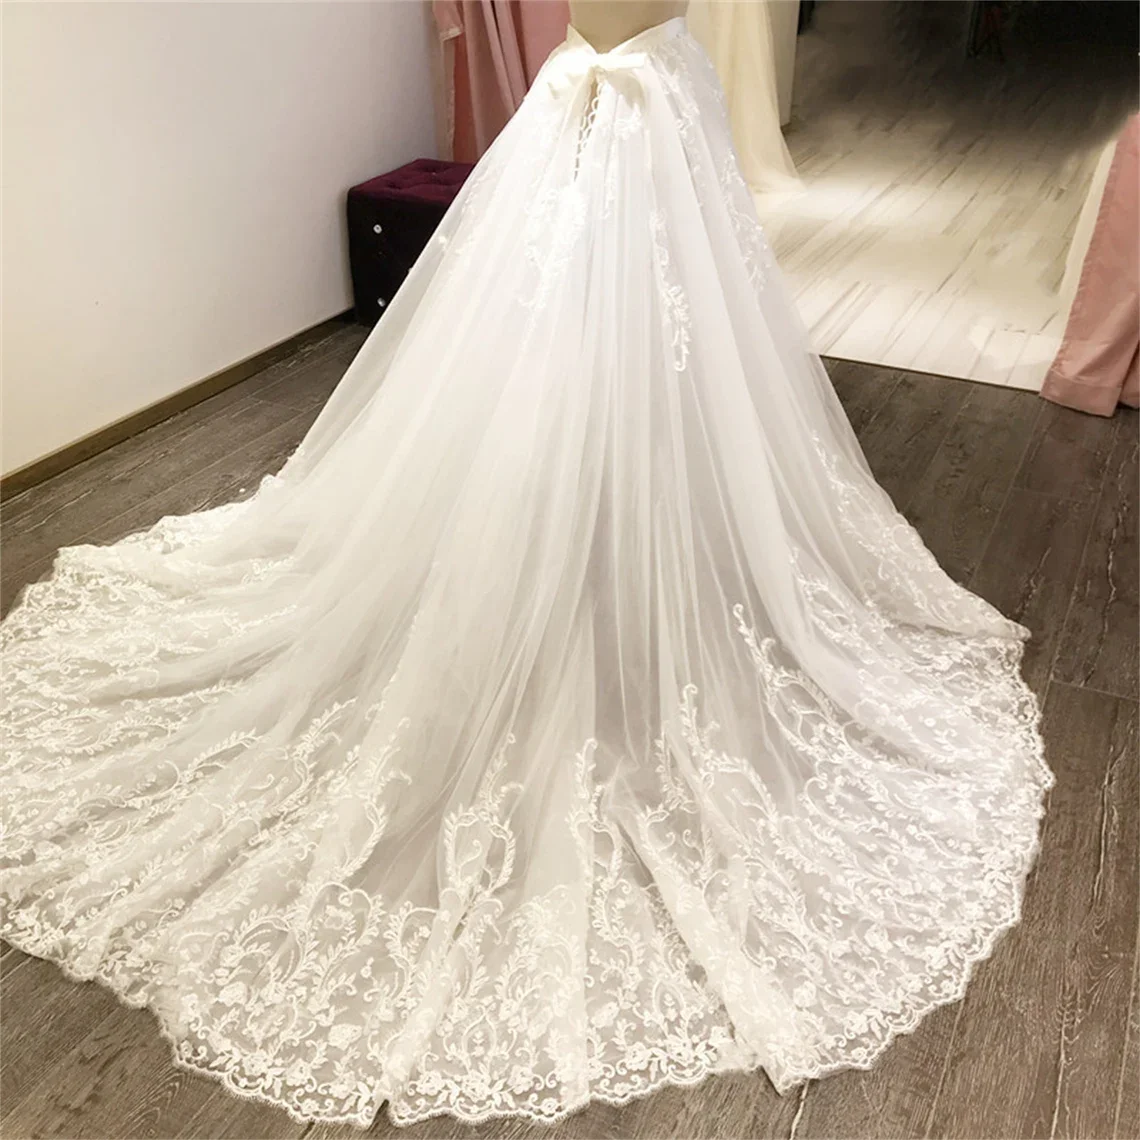 Luxury Lace Appliques Detachable Train Wedding Removable Skirt For Dresses Bridal Overskirt